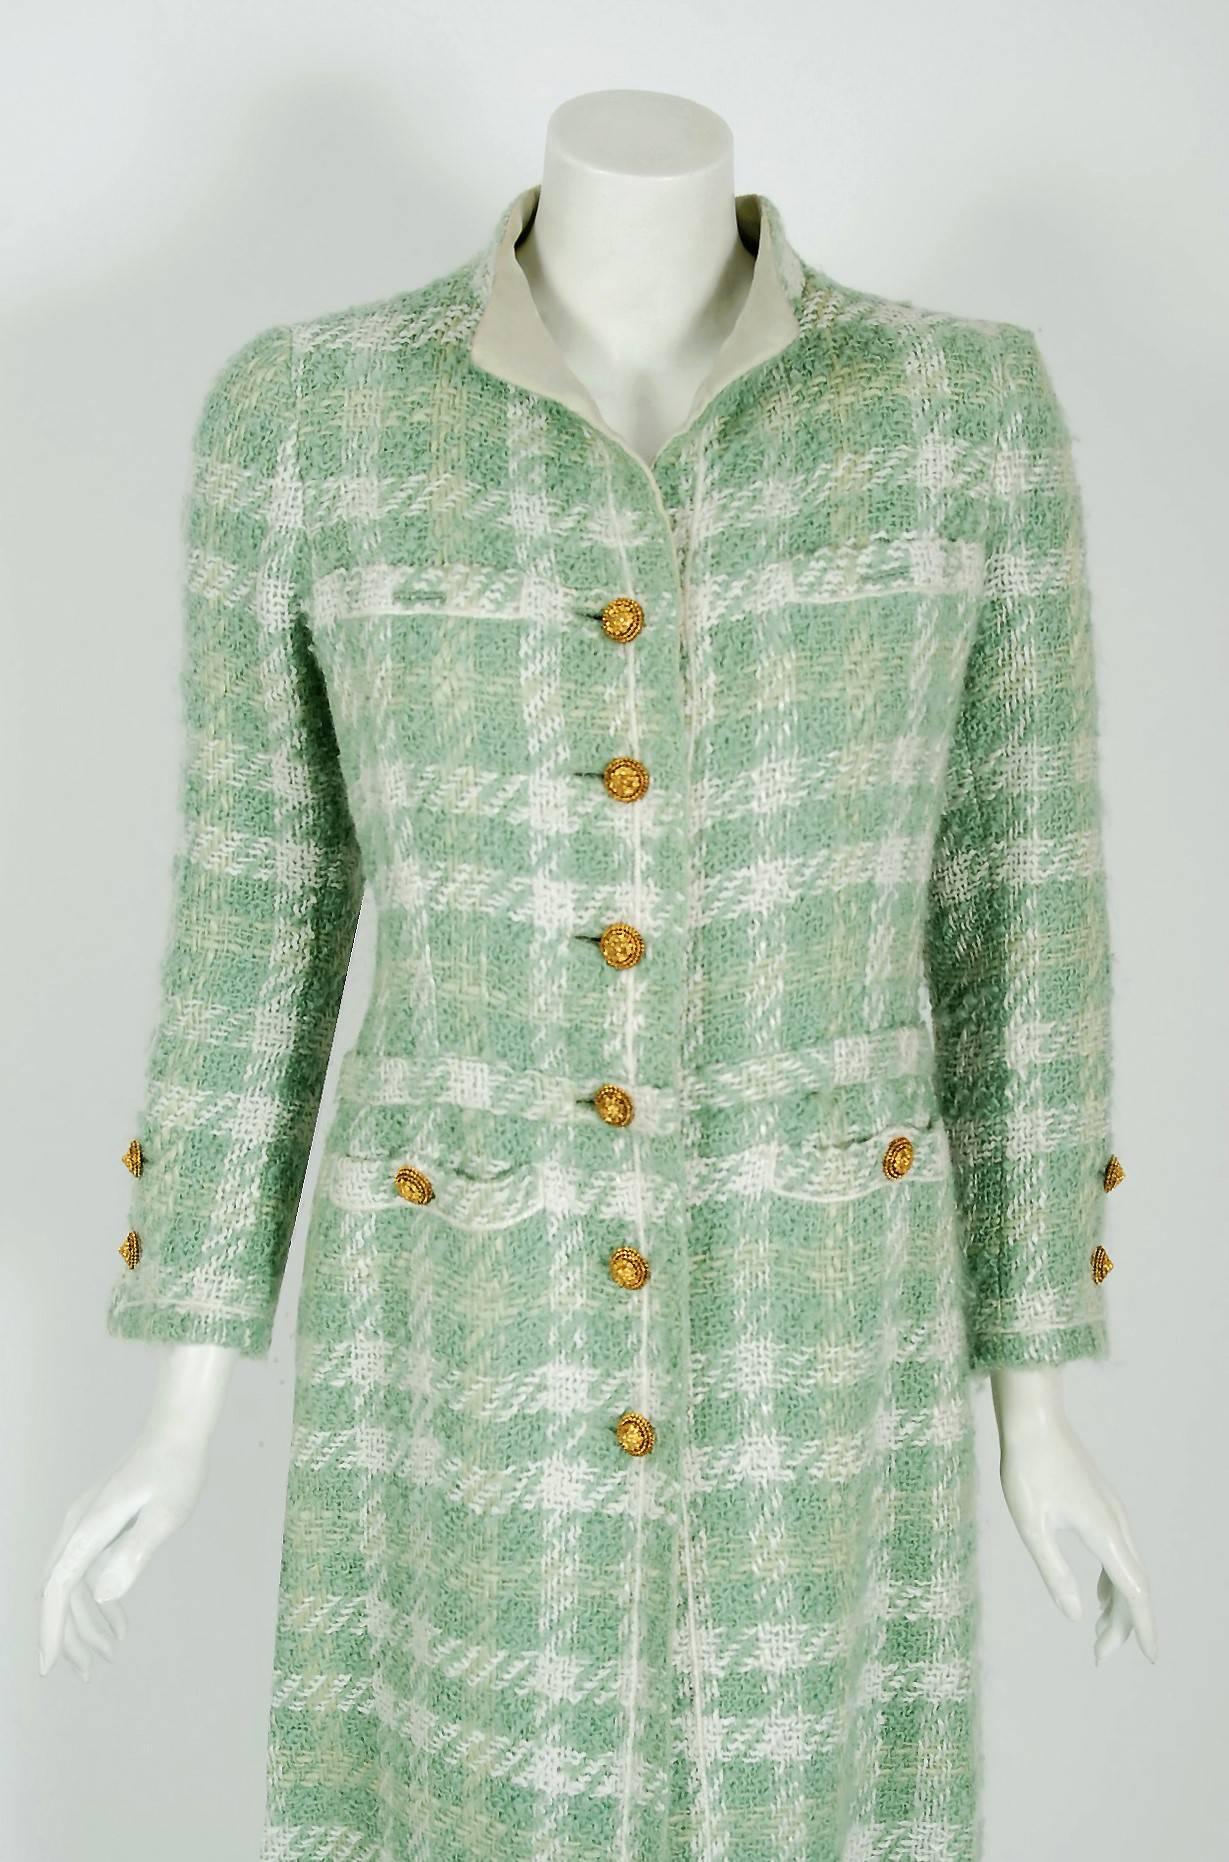 Chanel is known to be one of the most luxurious and decadent fashion houses in the world. This breathtaking seafoam green boucle plaid wool coat from her 1970 Spring.Summer collection is a perfect example of why this couture brand has stood the test